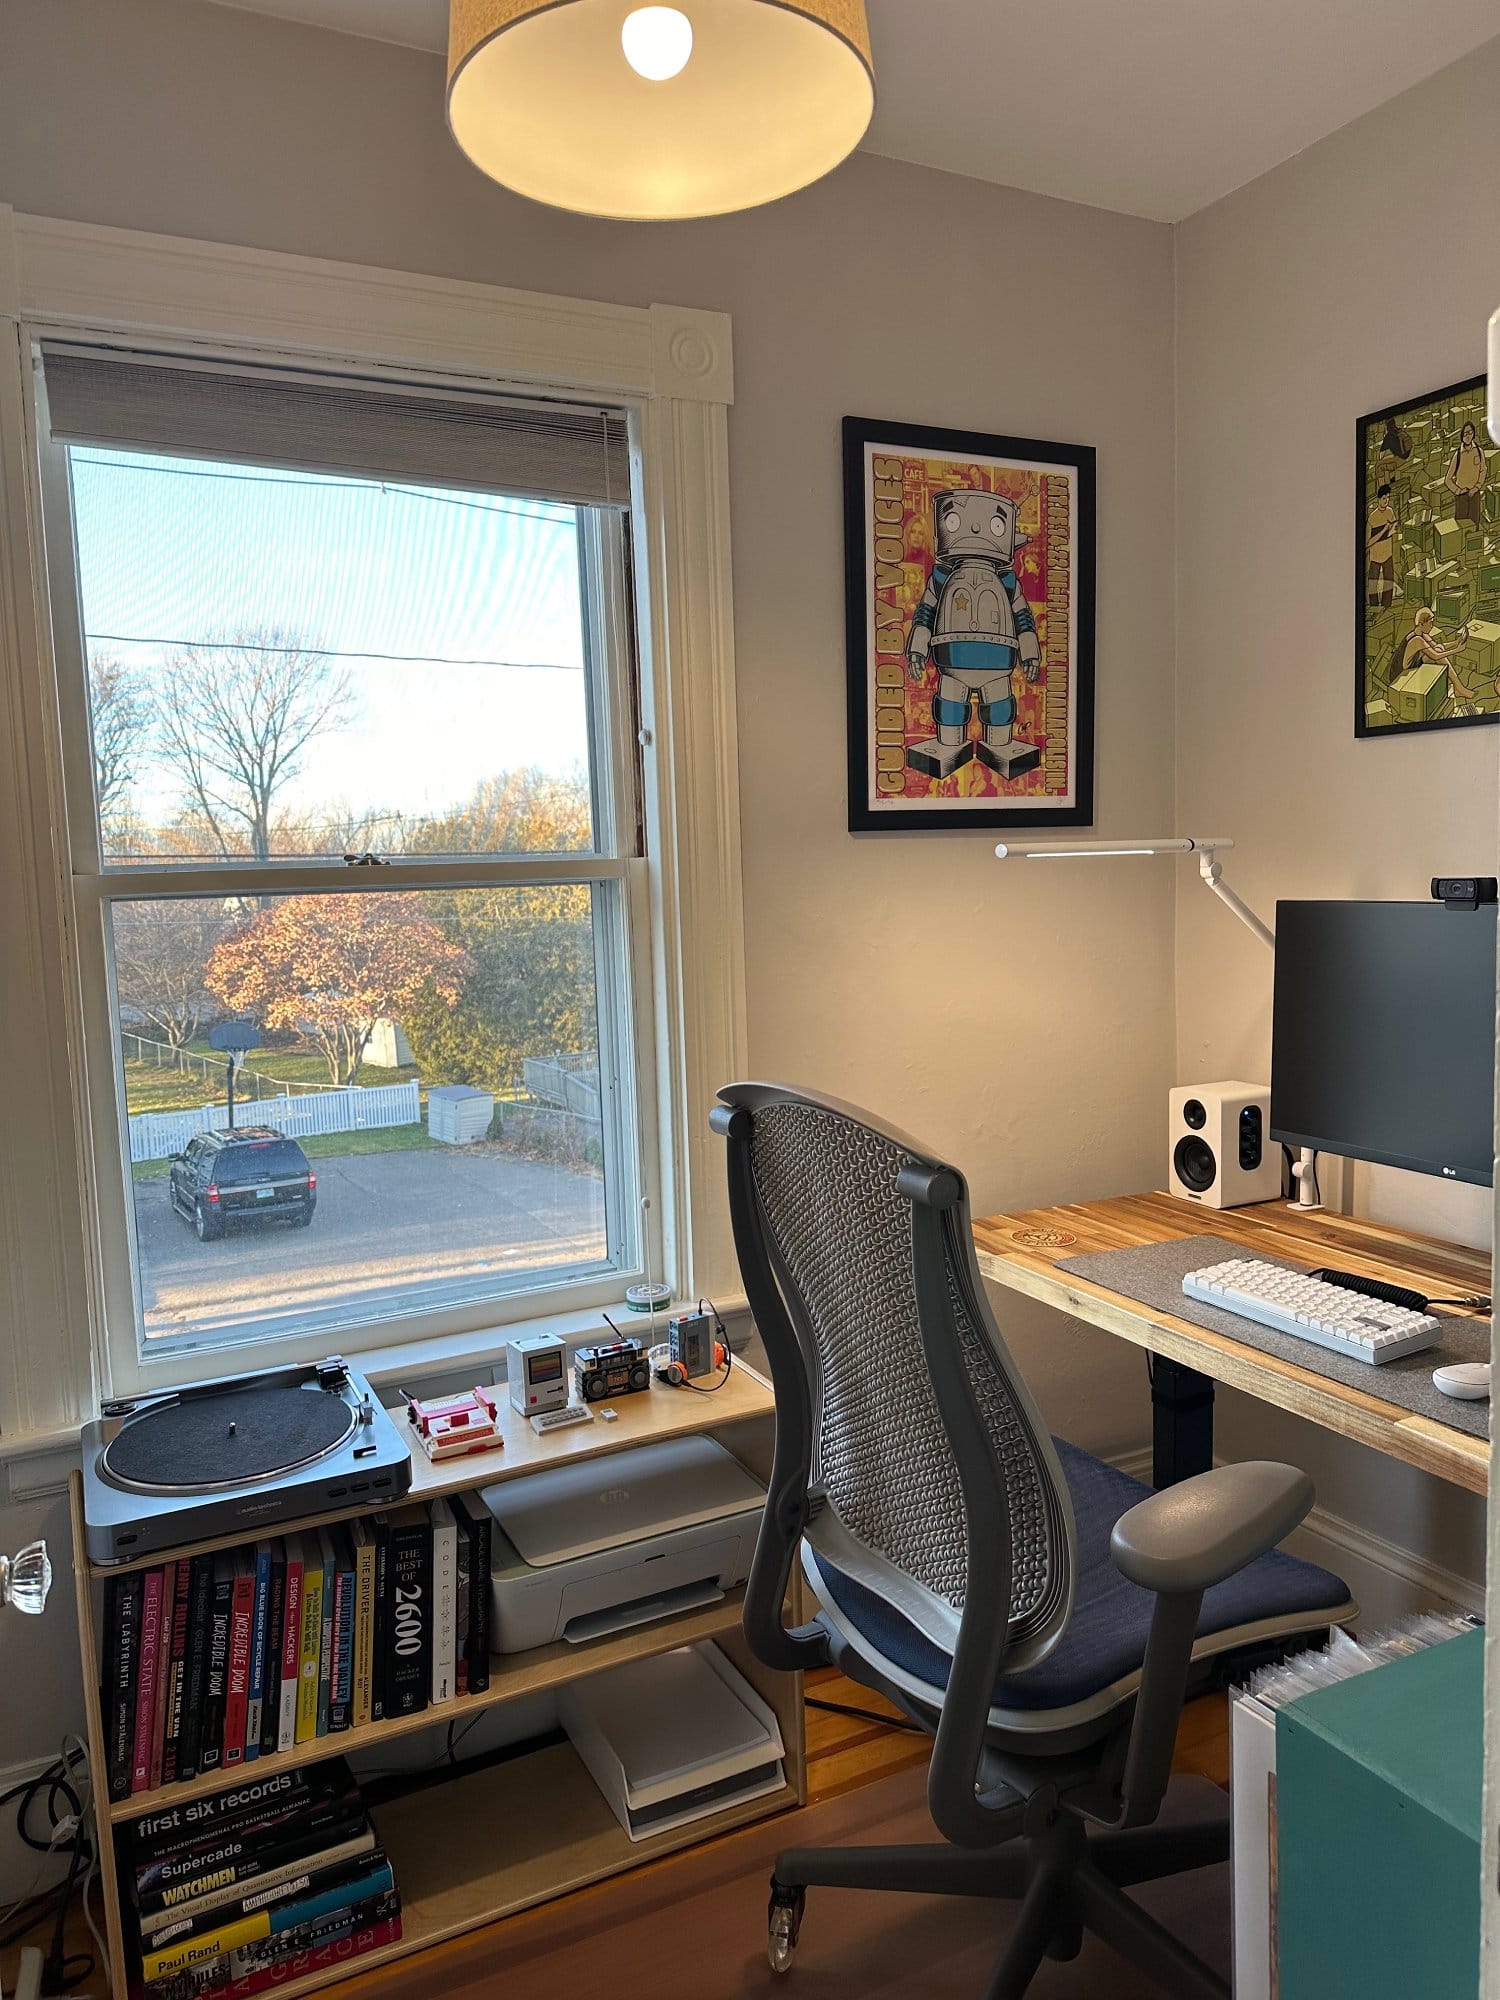 A home office with a record player and bookshelf under the window, ergonomic chair, and desk with computer and speakers, with a view of the outdoors and framed artwork on the walls